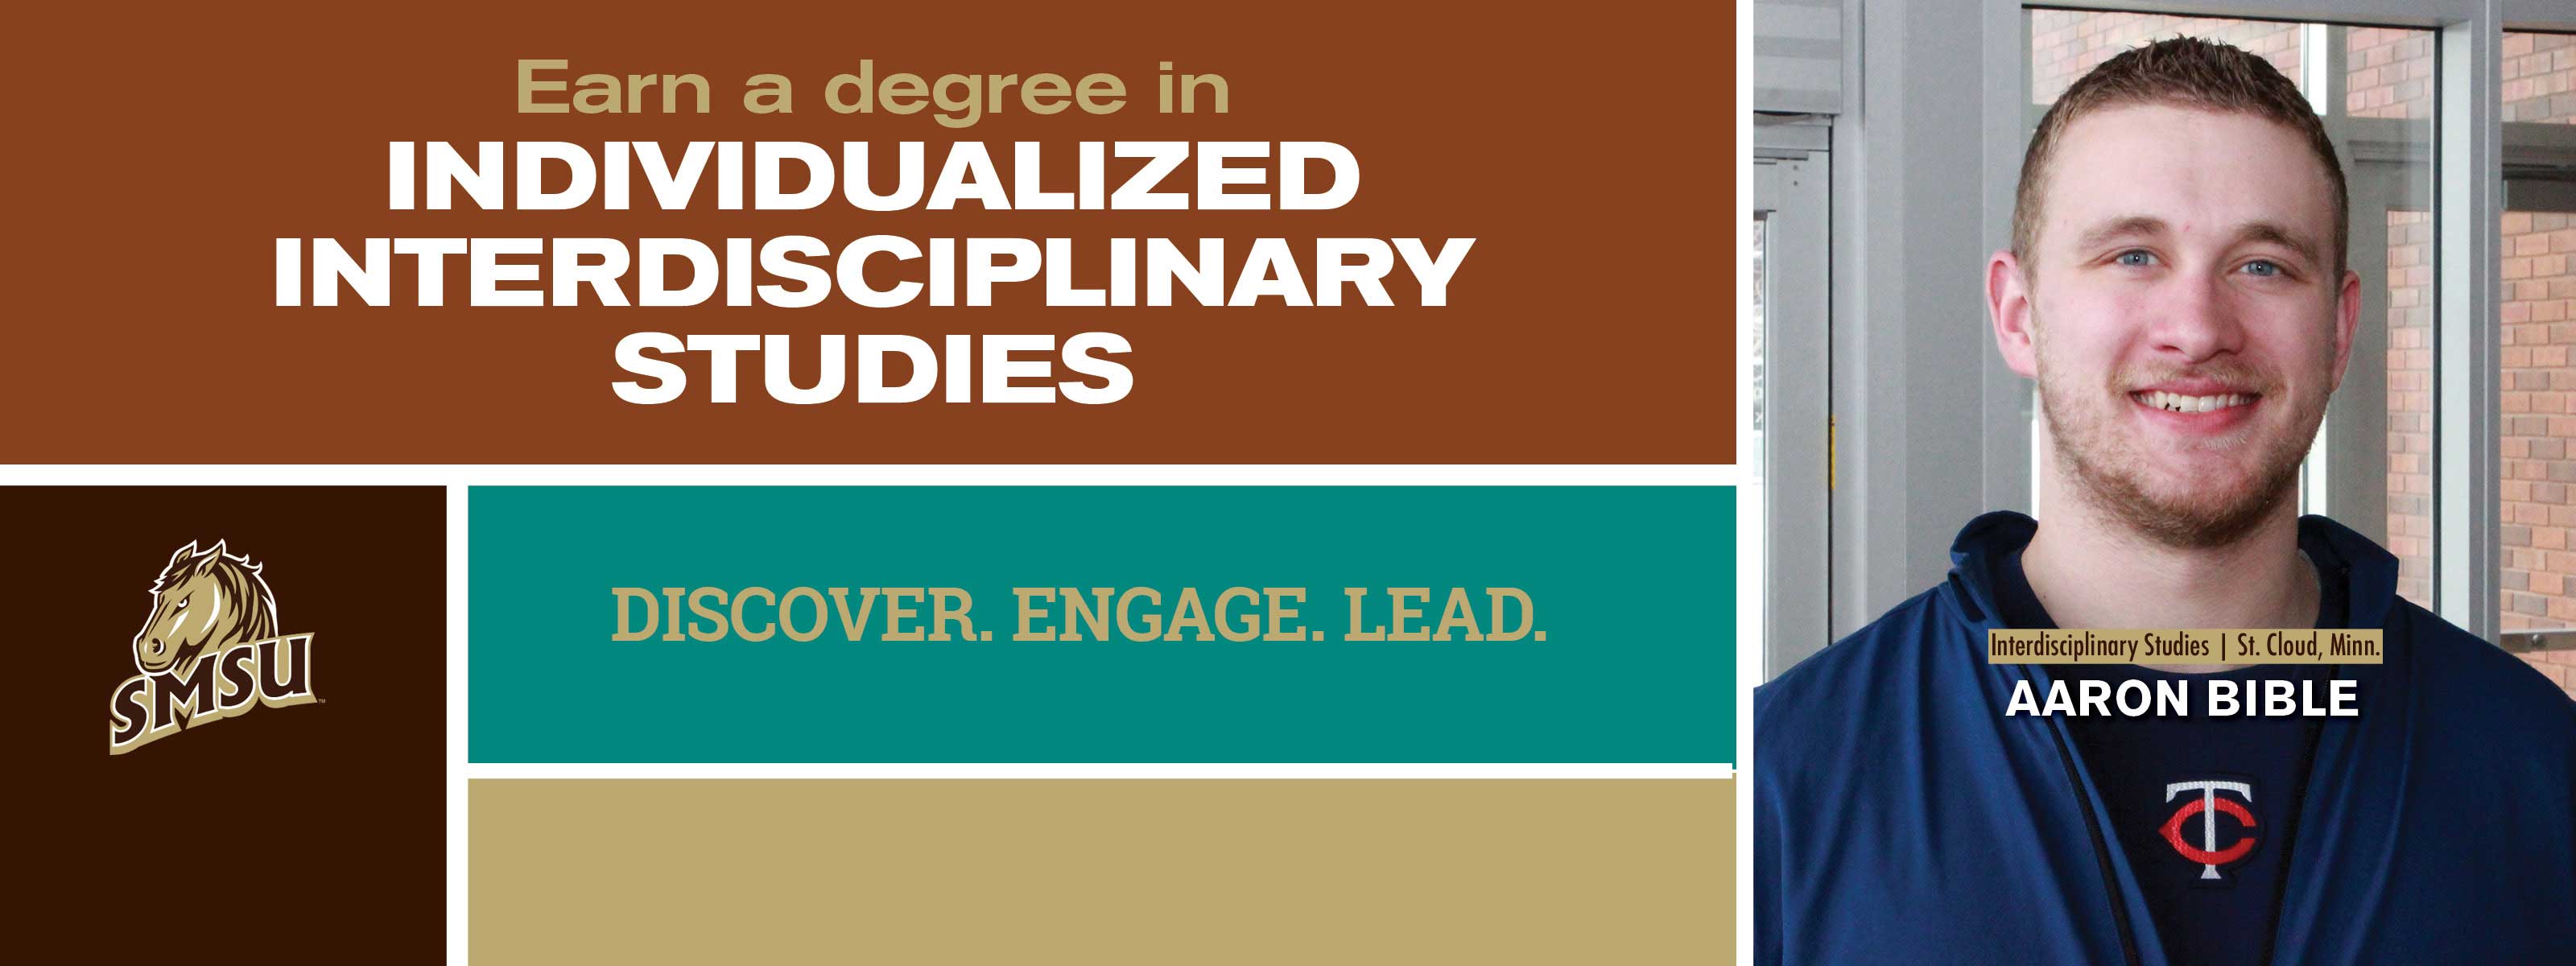 Earn A Degree In Individualized Interdisciplinary Studies - Discover. Engage. Lead.